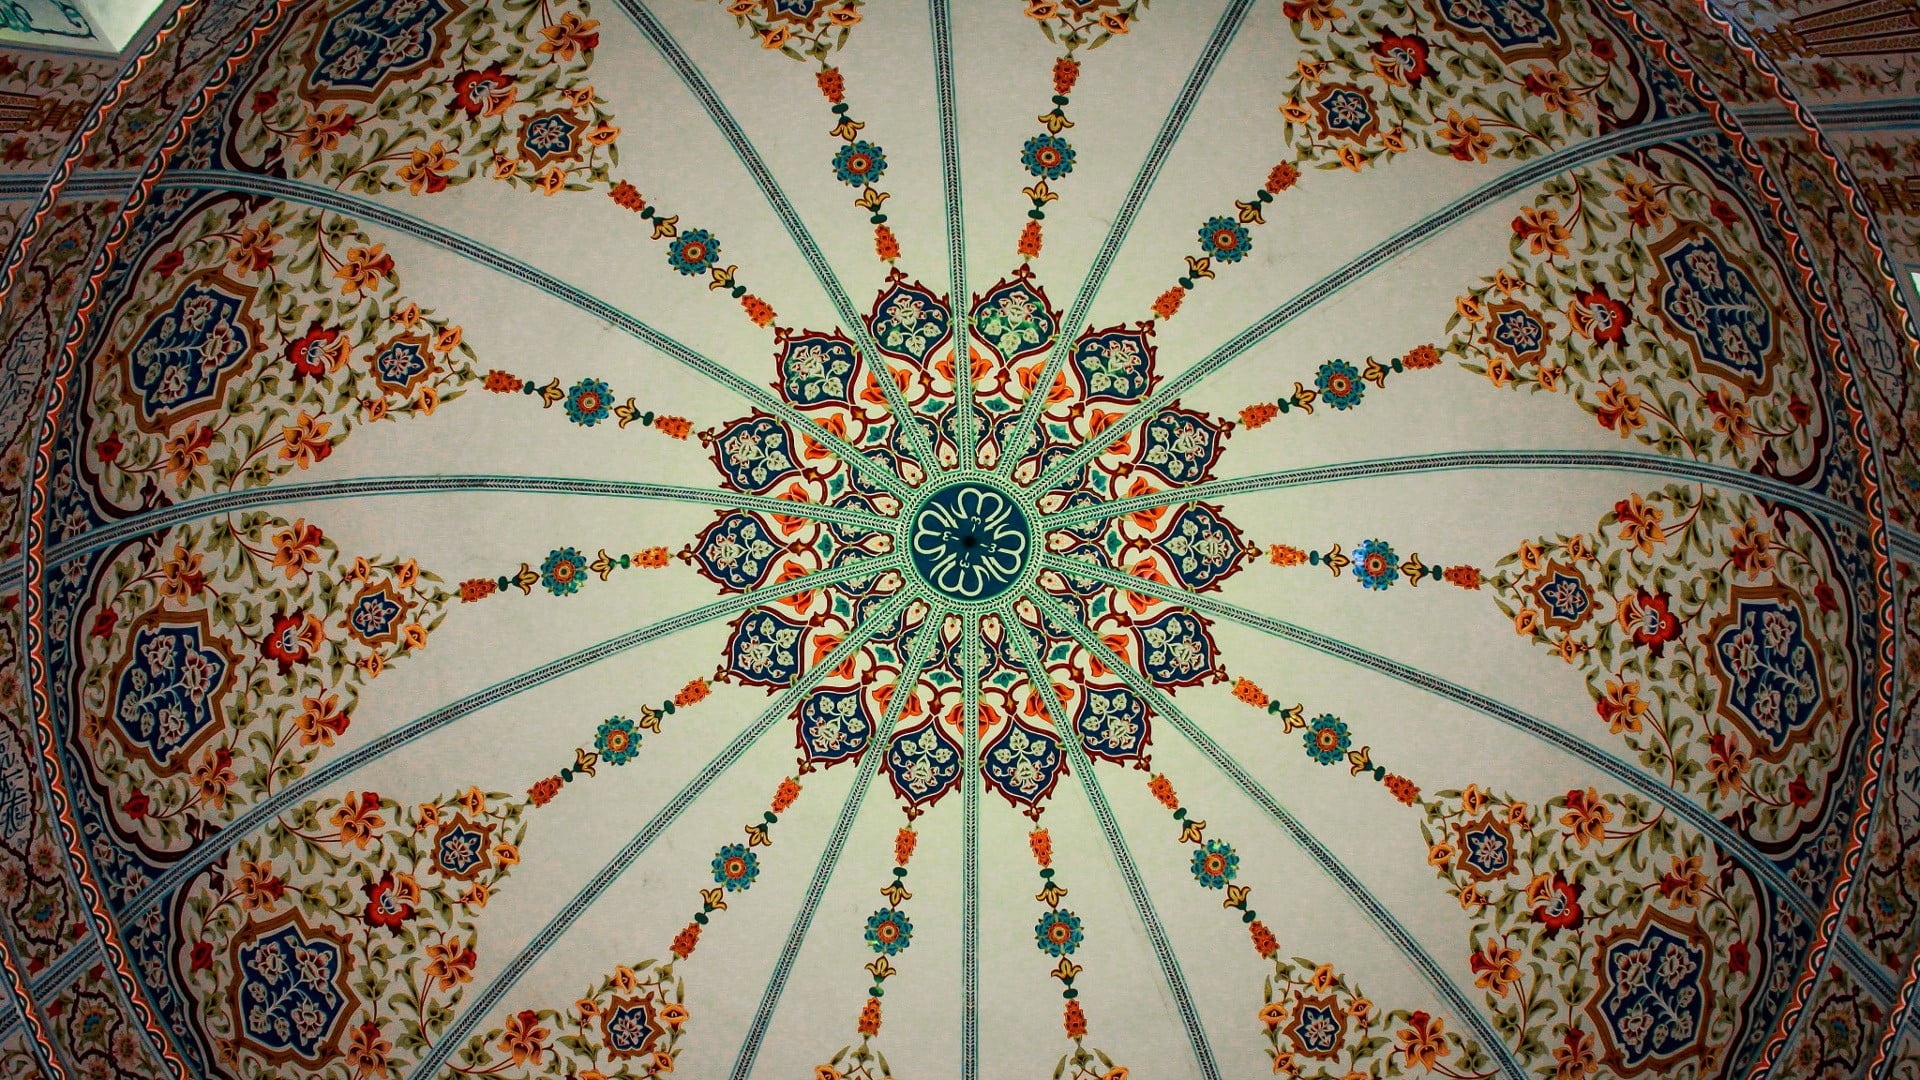 white, green, red, and black dome-shaped ceiling, Pakistan, artwork, architecture, ceilings